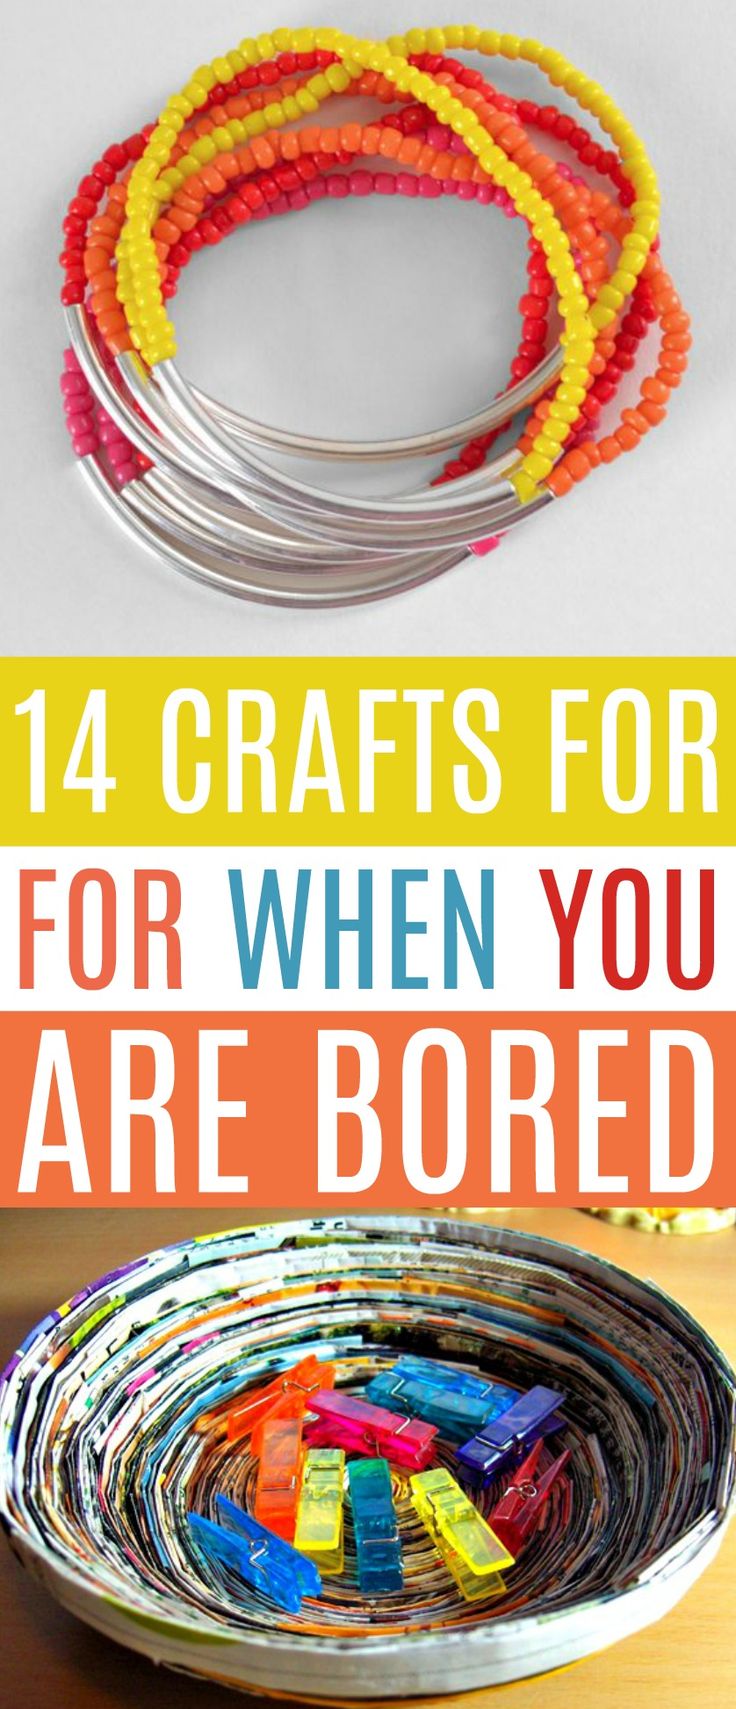 So here are just 14 crafts for when you are bored, you’re sure to love them! T...